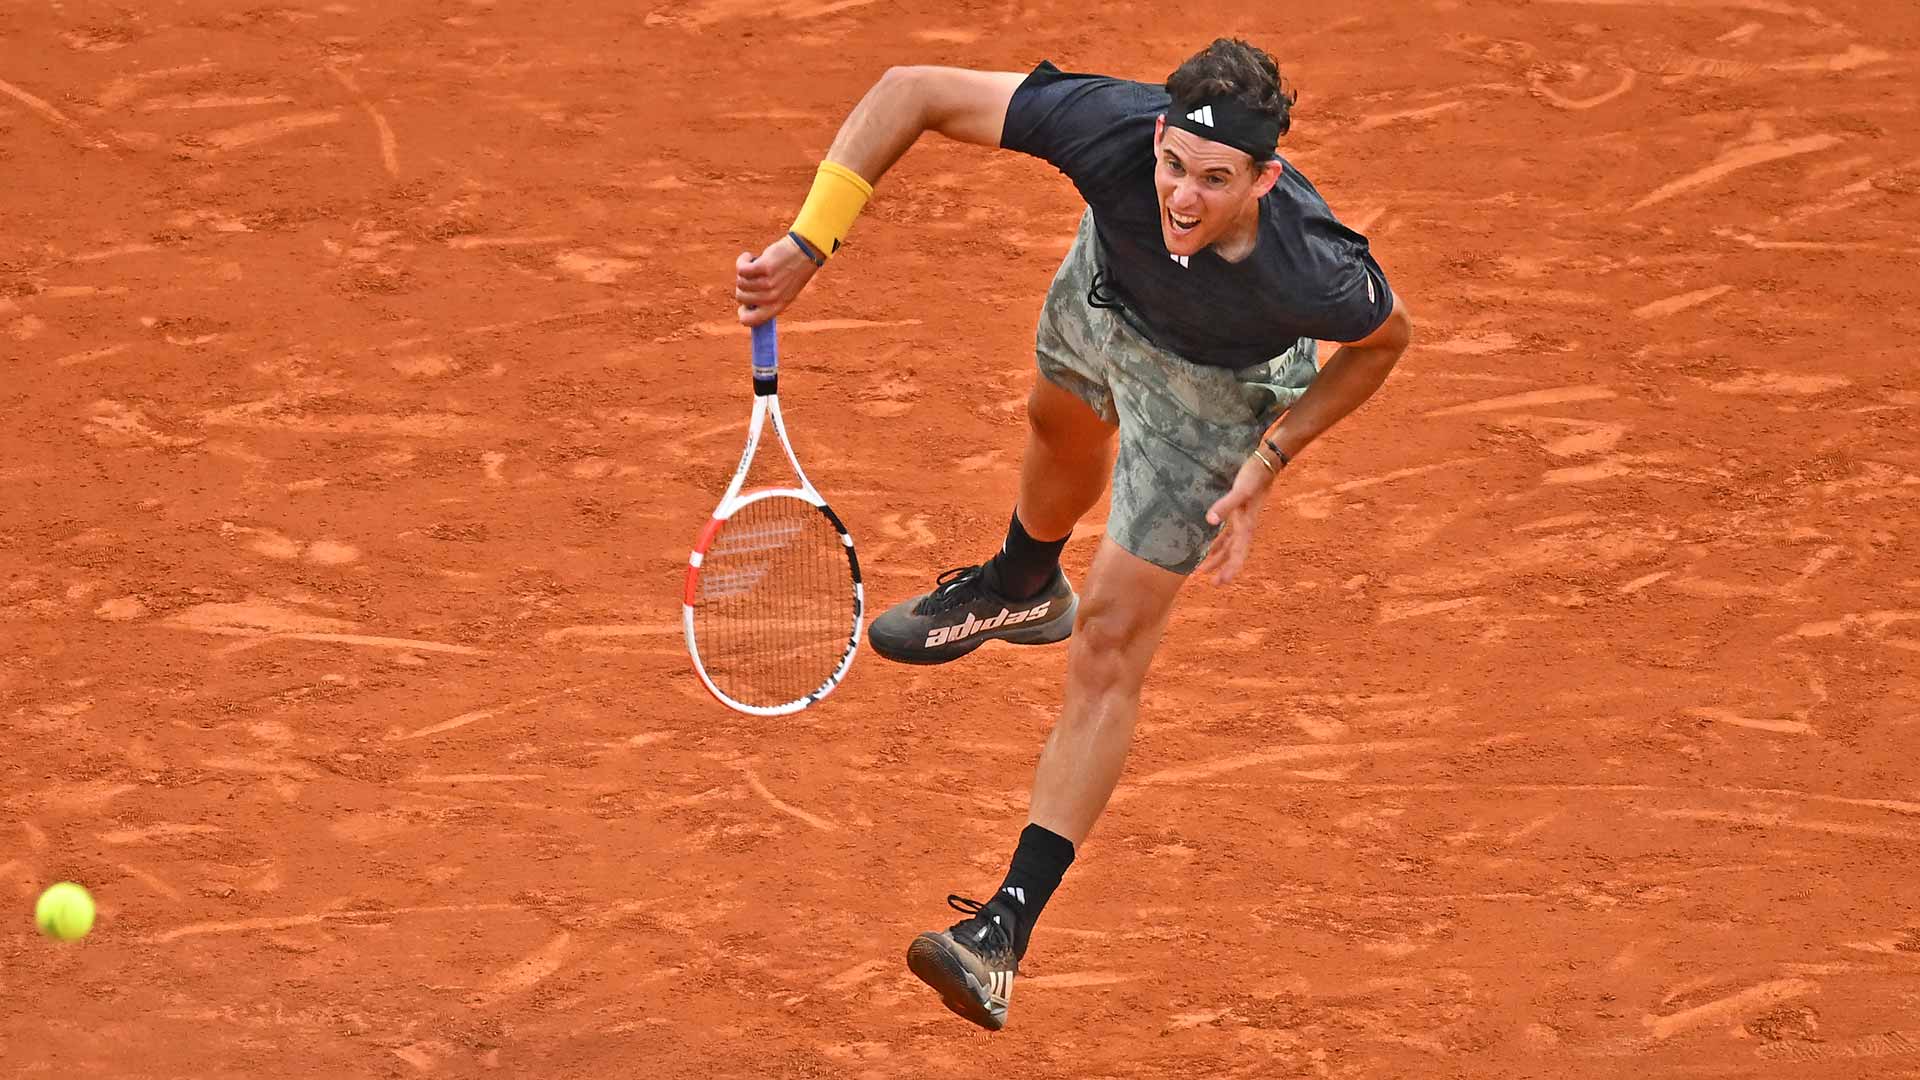 Thiem discovers qualifying path for his final Roland Garros